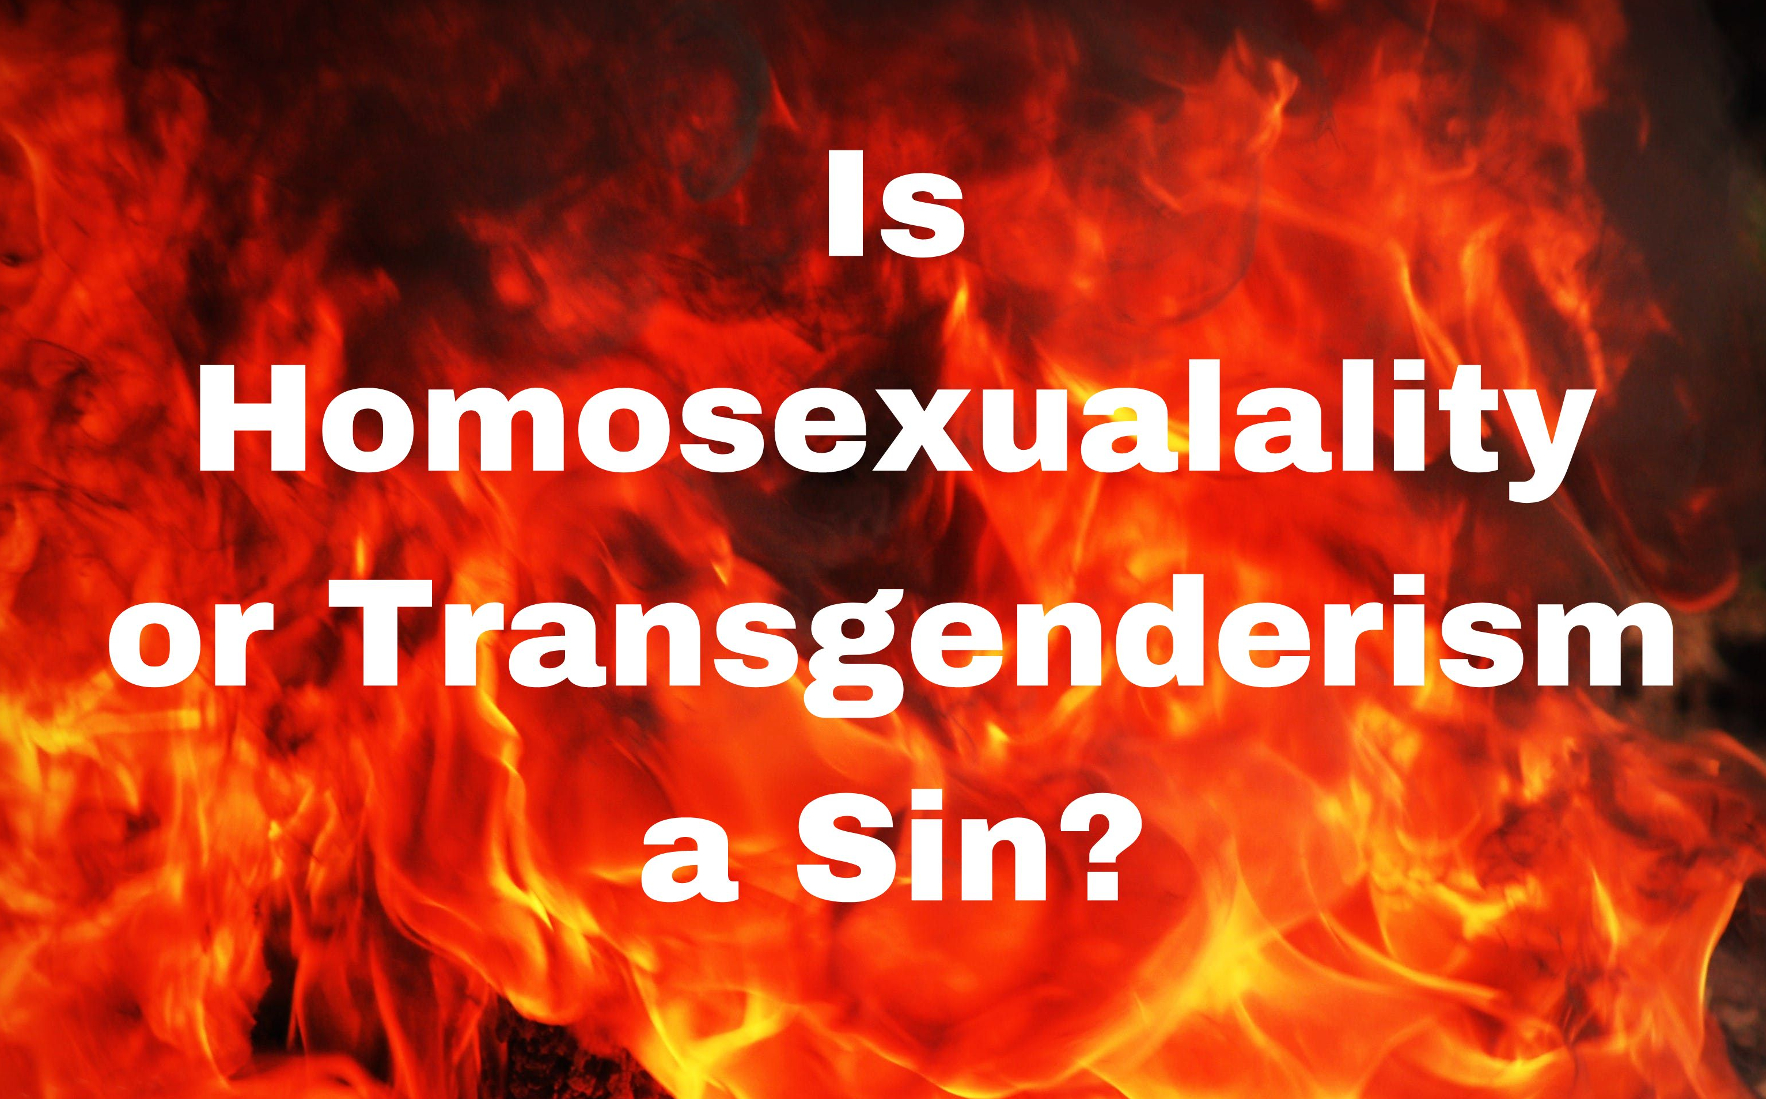 Is Homosexuality or Transgenderism a Sin